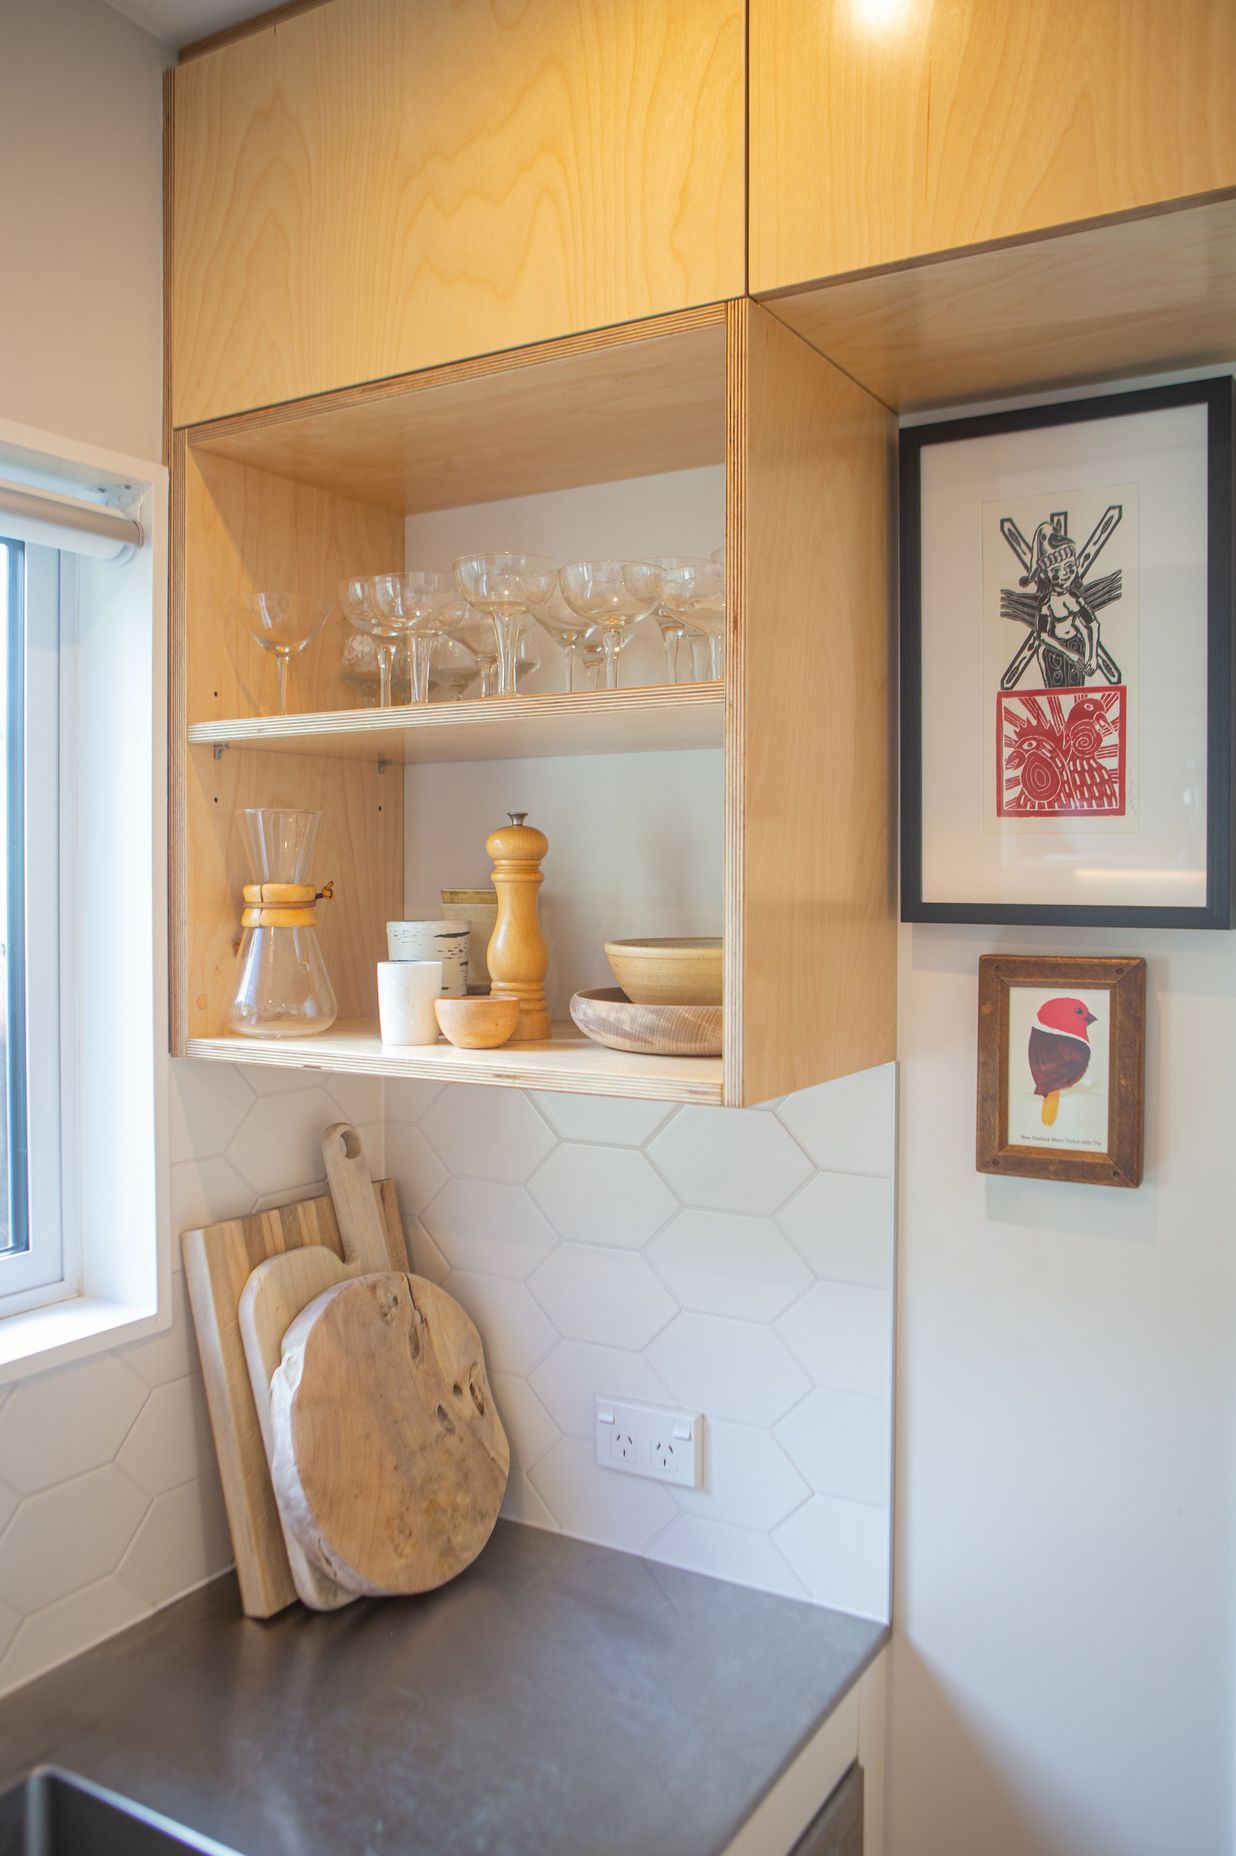 Open birch plywood shelving made use of the spaces around the window frame.